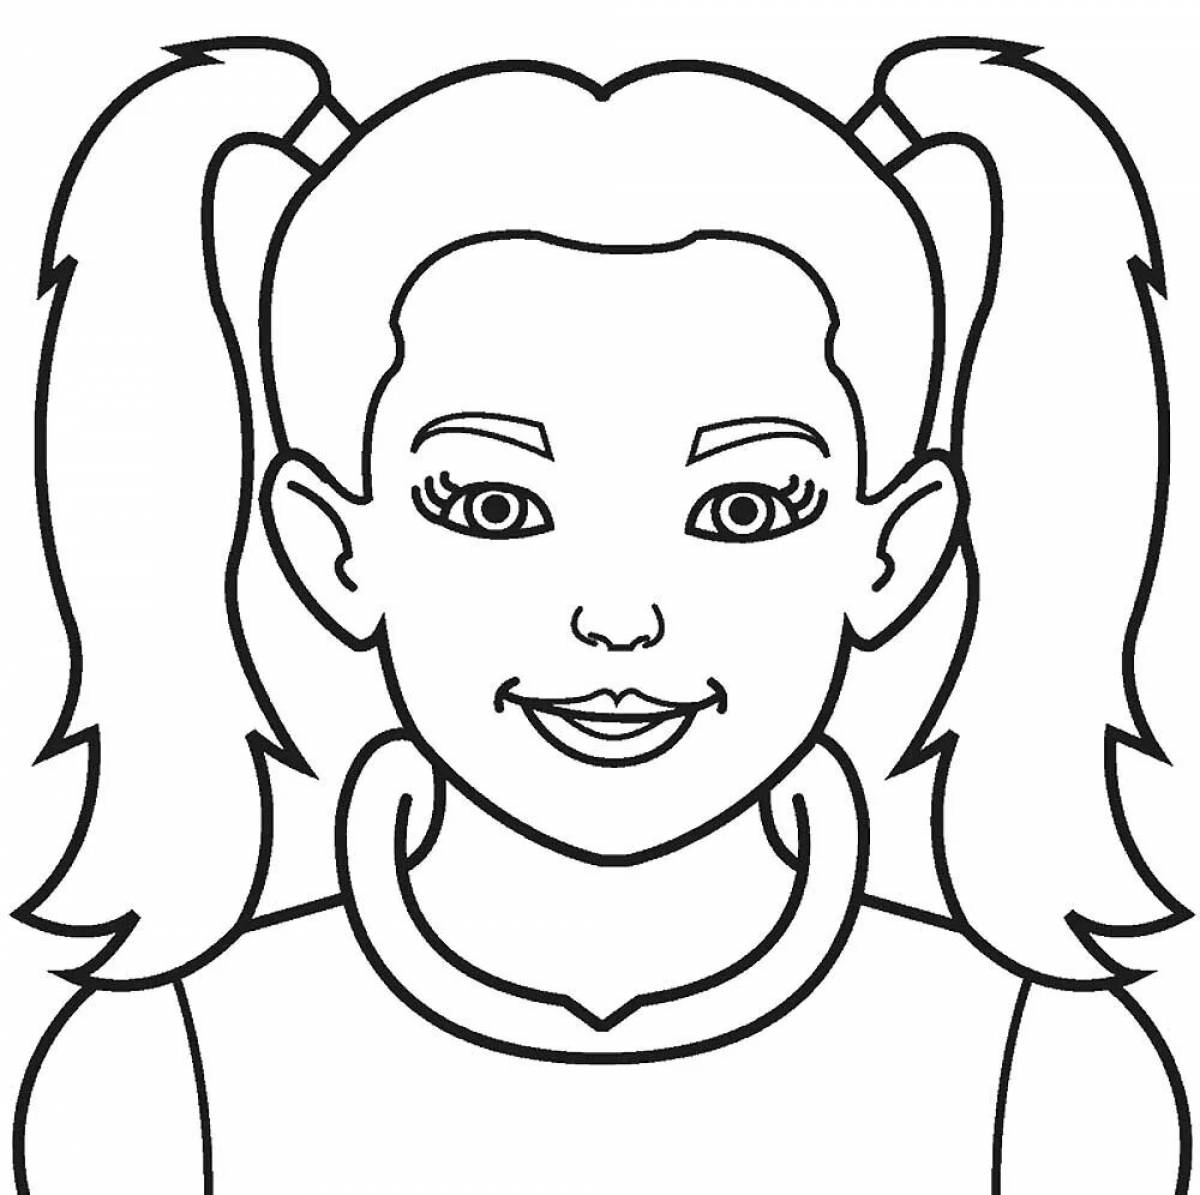 Fun face coloring book for kids